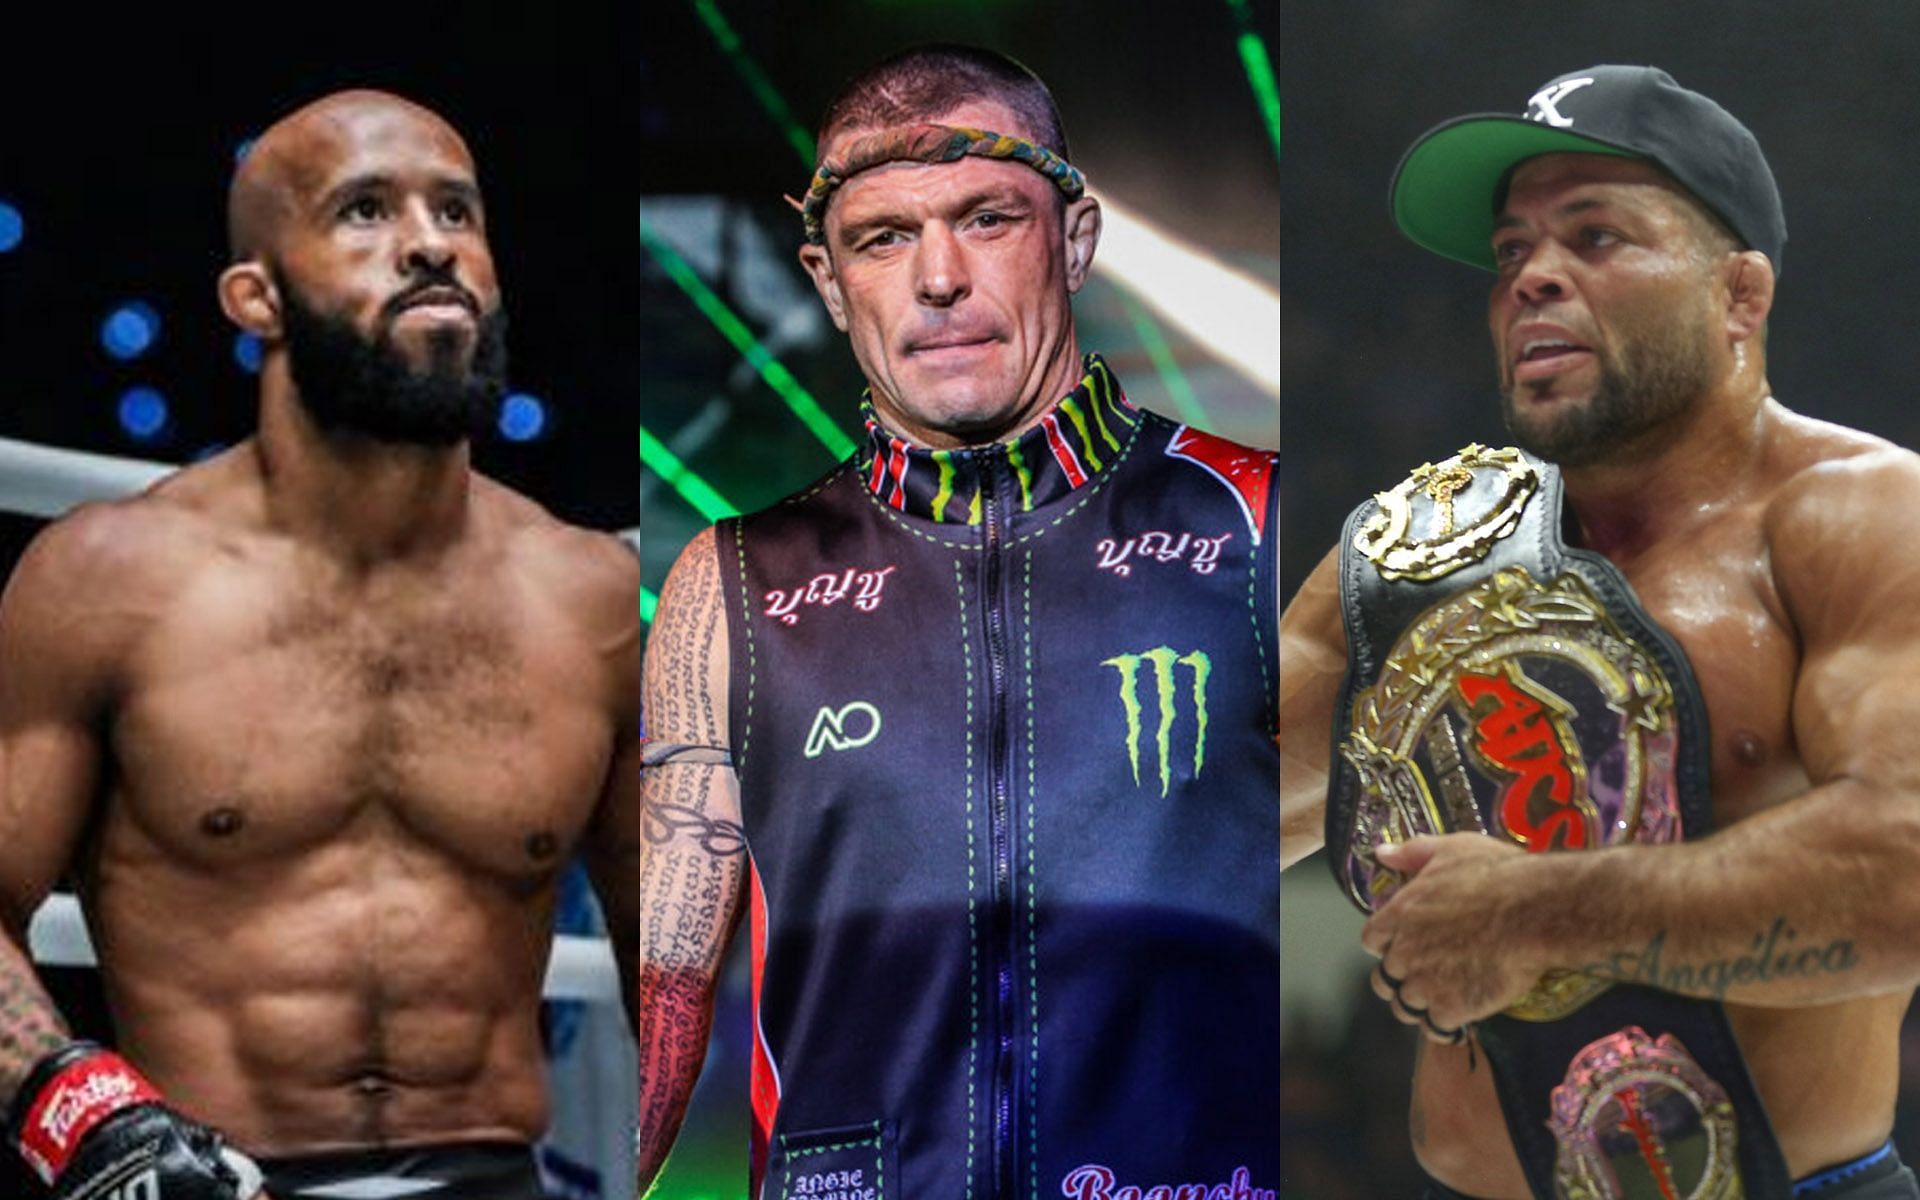 Demetrious Johnson (L) John Wayne Parr (C) and Andre Galvao (R) are legends of their respective sports. | [Photos: ONE Championship]